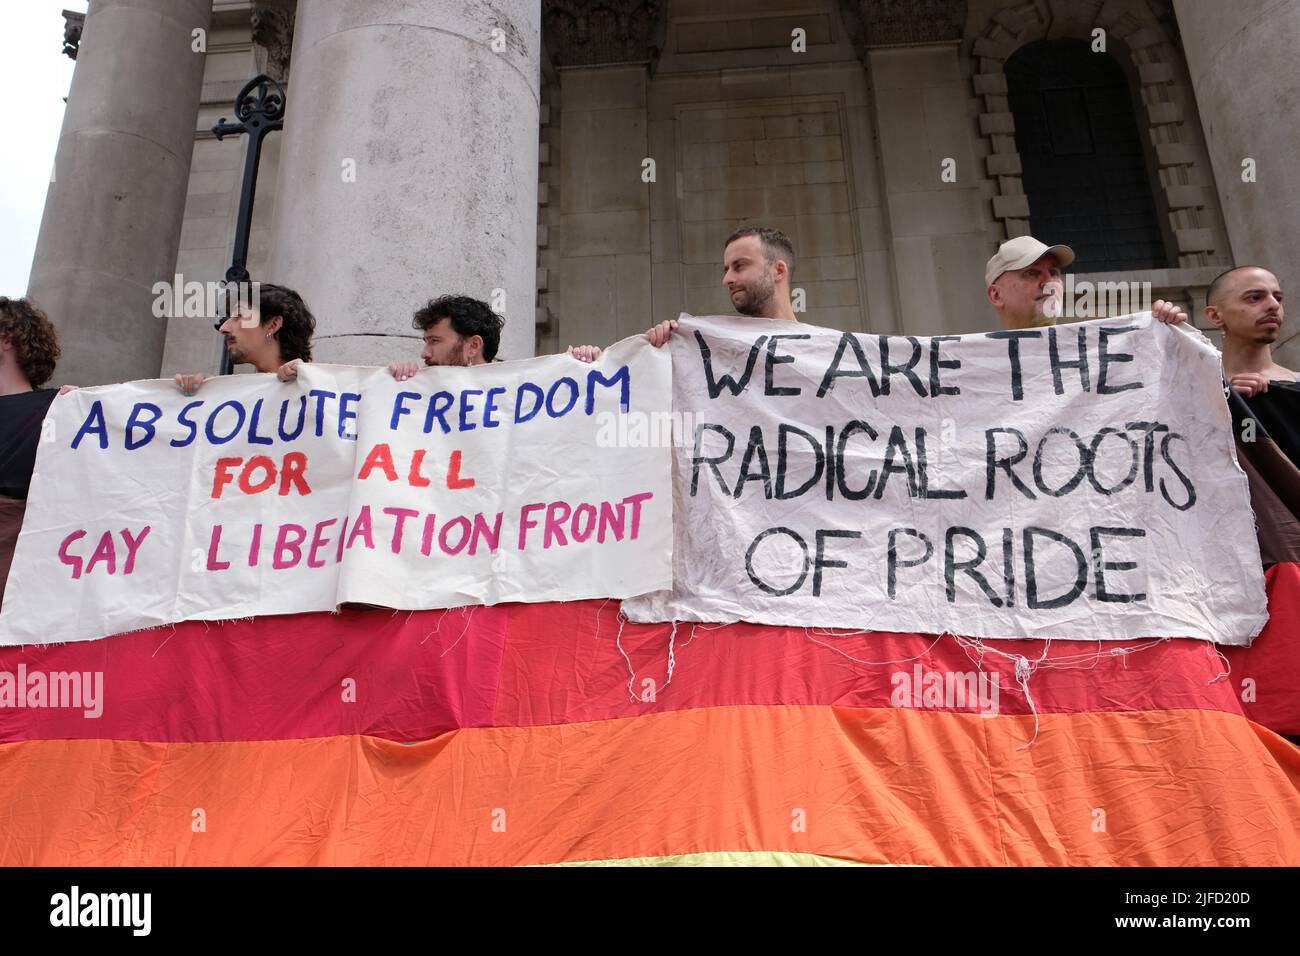 London, UK, 1st July, 2022. Veterans of the first Pride march in the UK and other LGBT+ activists marked the 50th anniversary of the event by marching along the original route taken in 1972.  The demonstrators took Pride back to its Gay Liberation Front (GLF) roots as a protest against discrimination and fight for equality. Credit: Eleventh Hour Photography/Alamy Live News Stock Photo